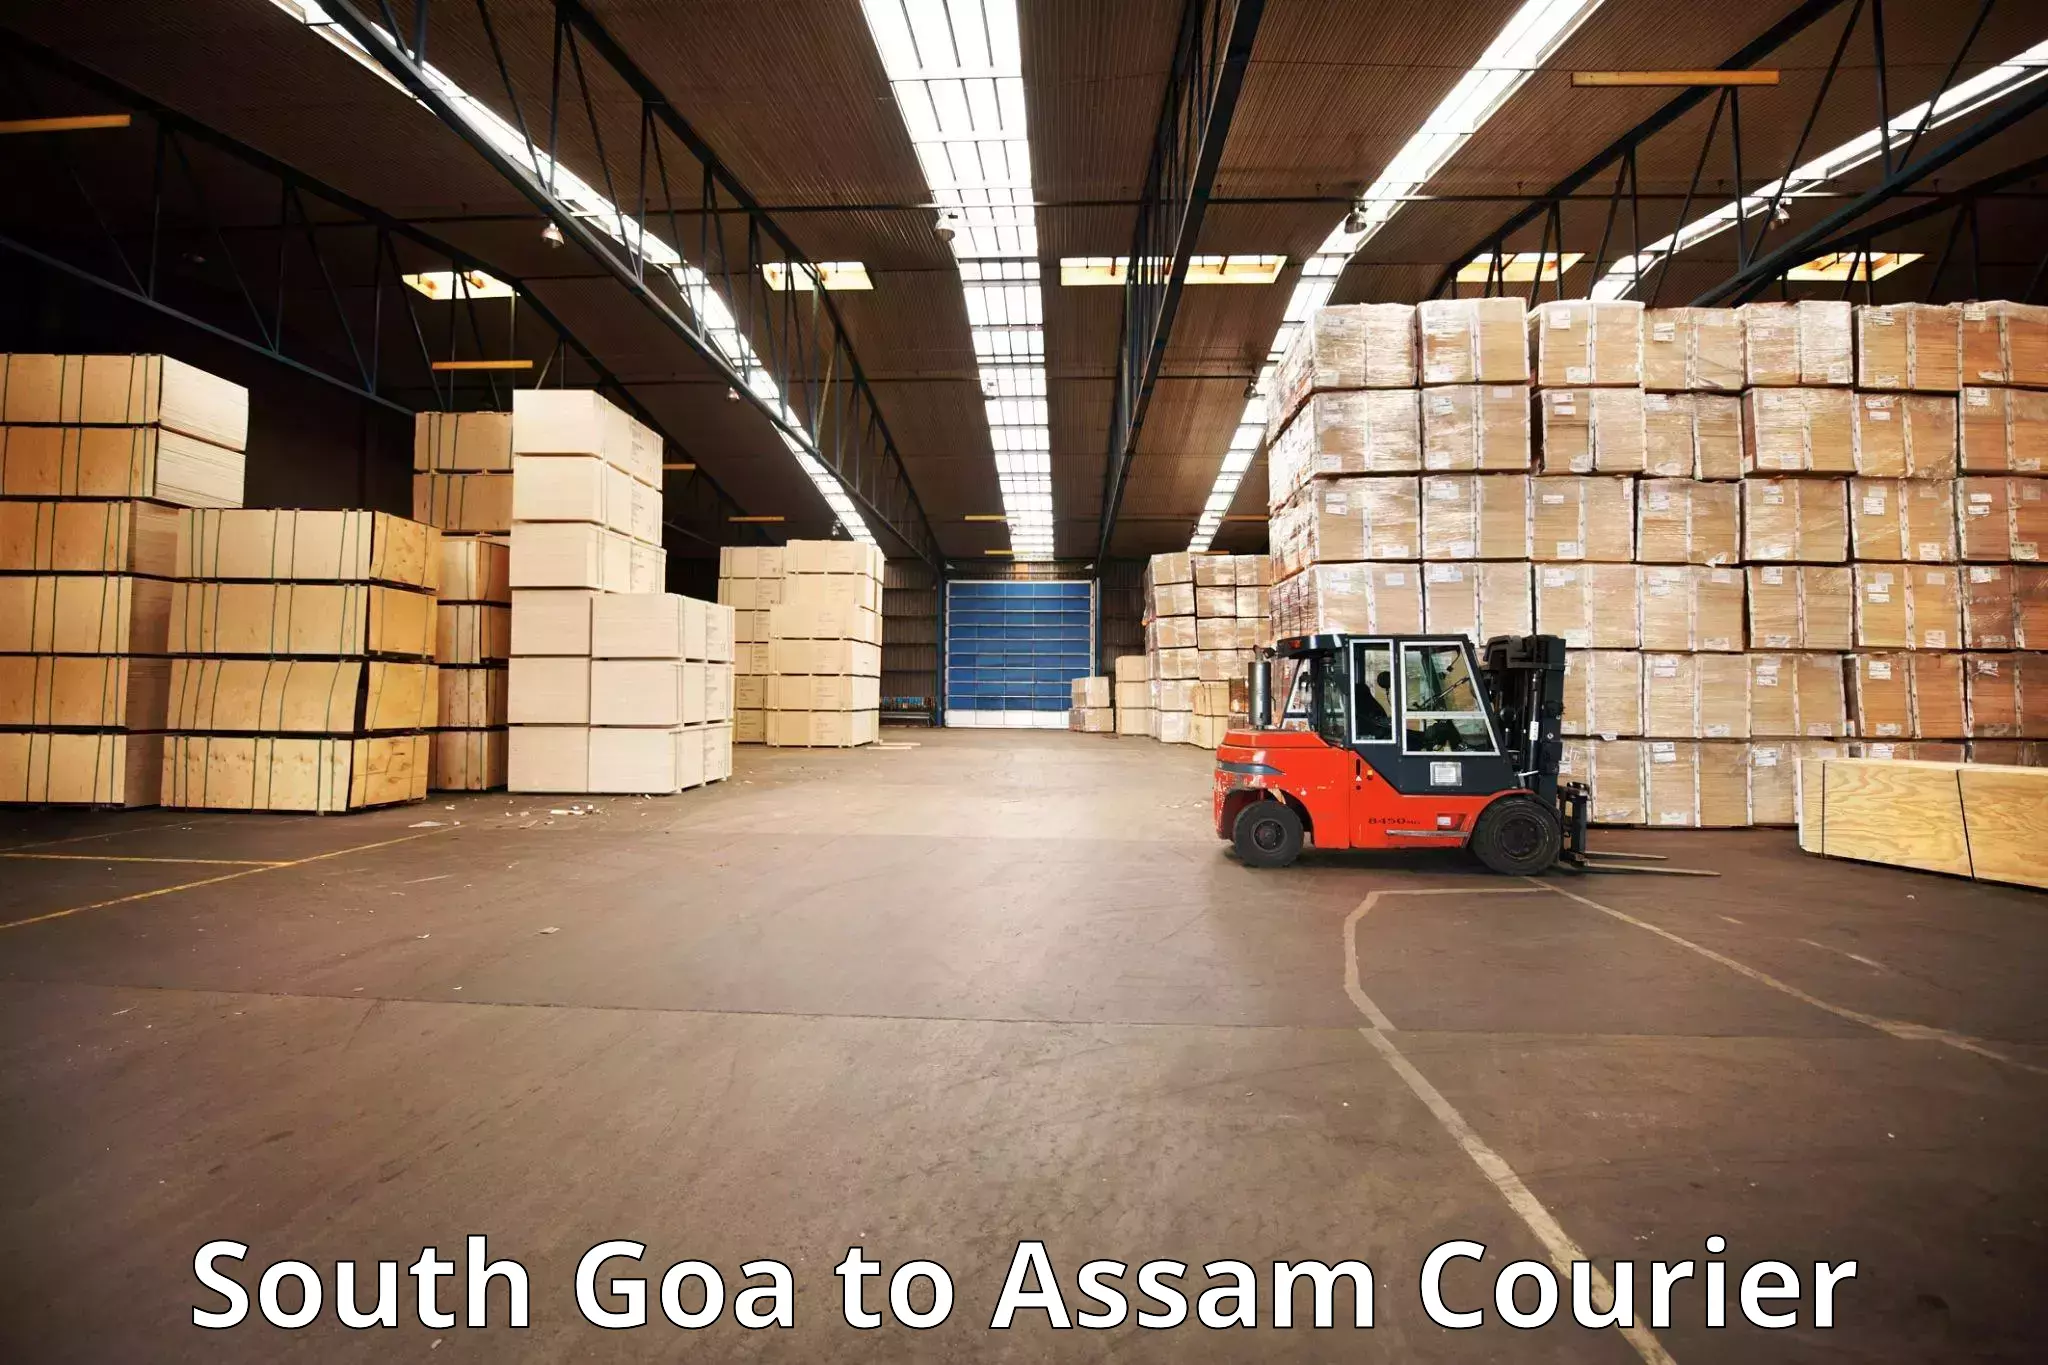 Luggage transport consulting South Goa to Majuli